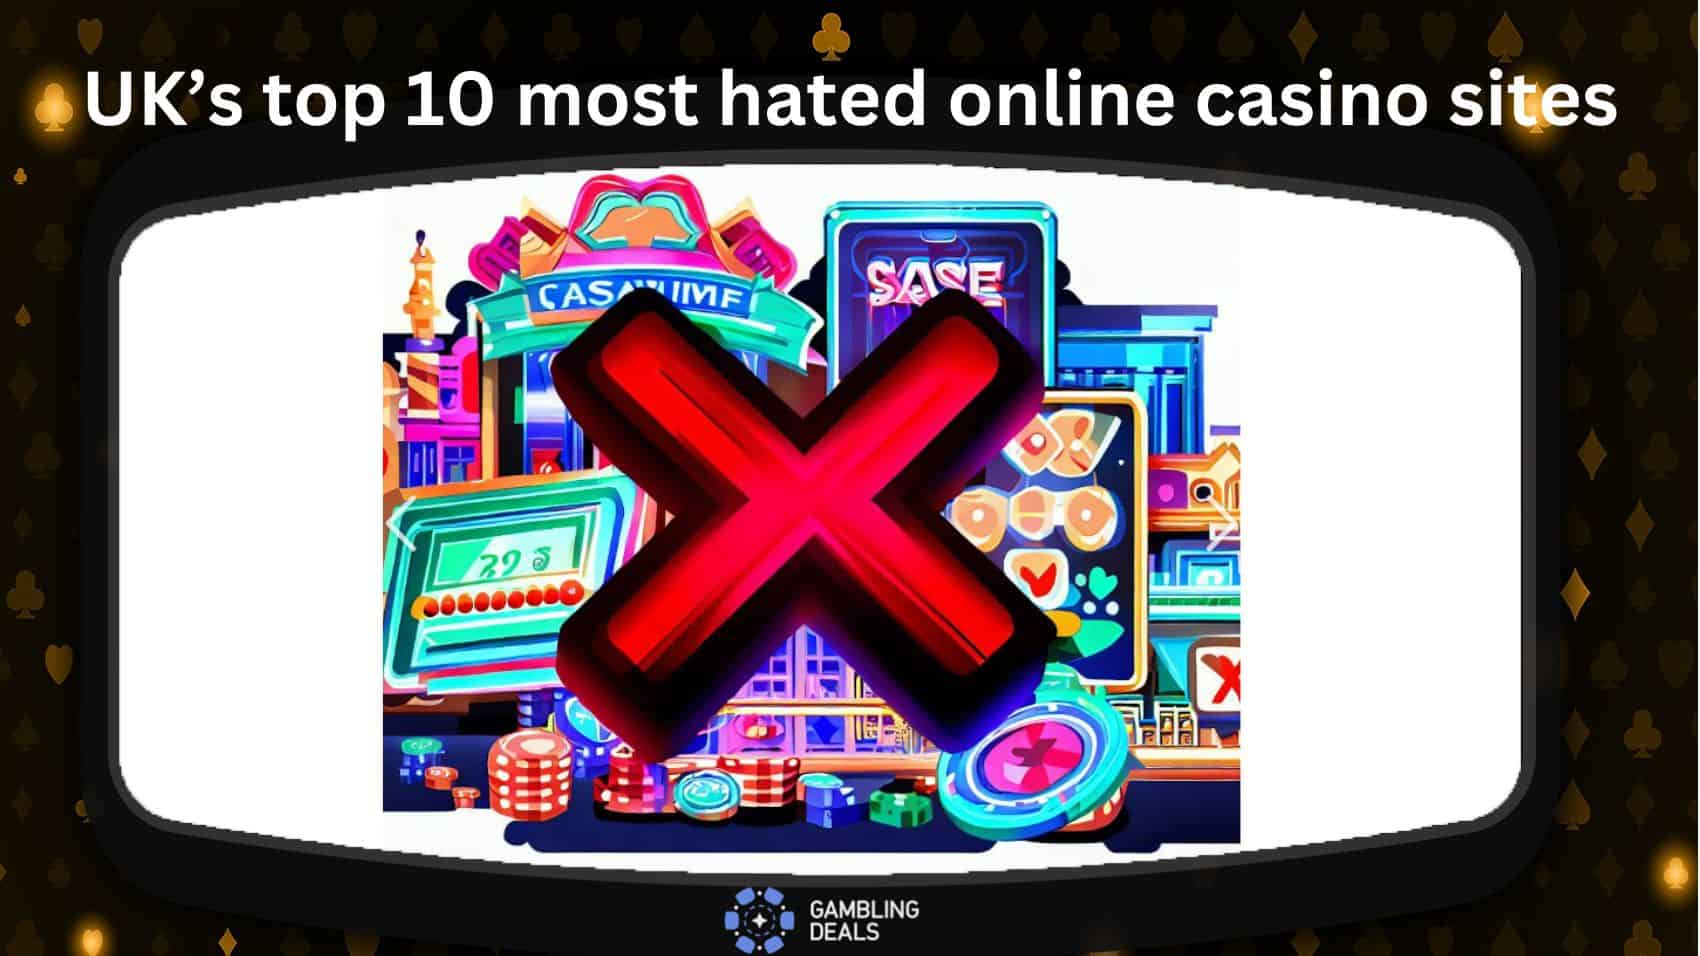 UK’s top 10 most hated online casino sites